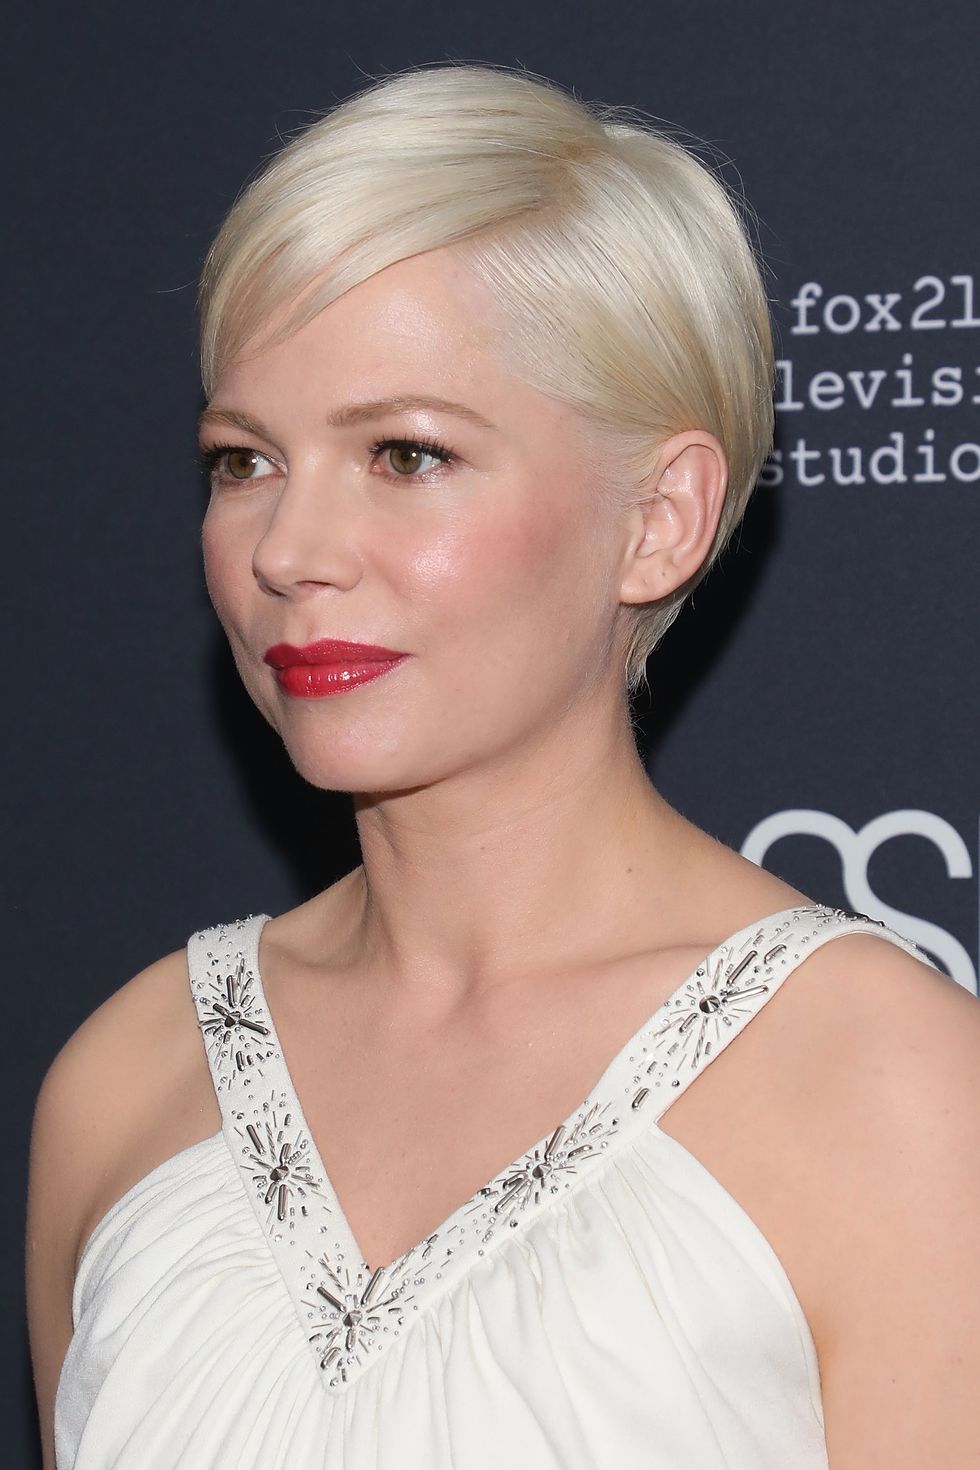 https://hips.hearstapps.com/hmg-prod/images/hbz-wedding-hairstyles-short-hair-michelle-williams-gettyimages-1135859194.jpg?crop=1xw:1xh;center,top&resize=980:*